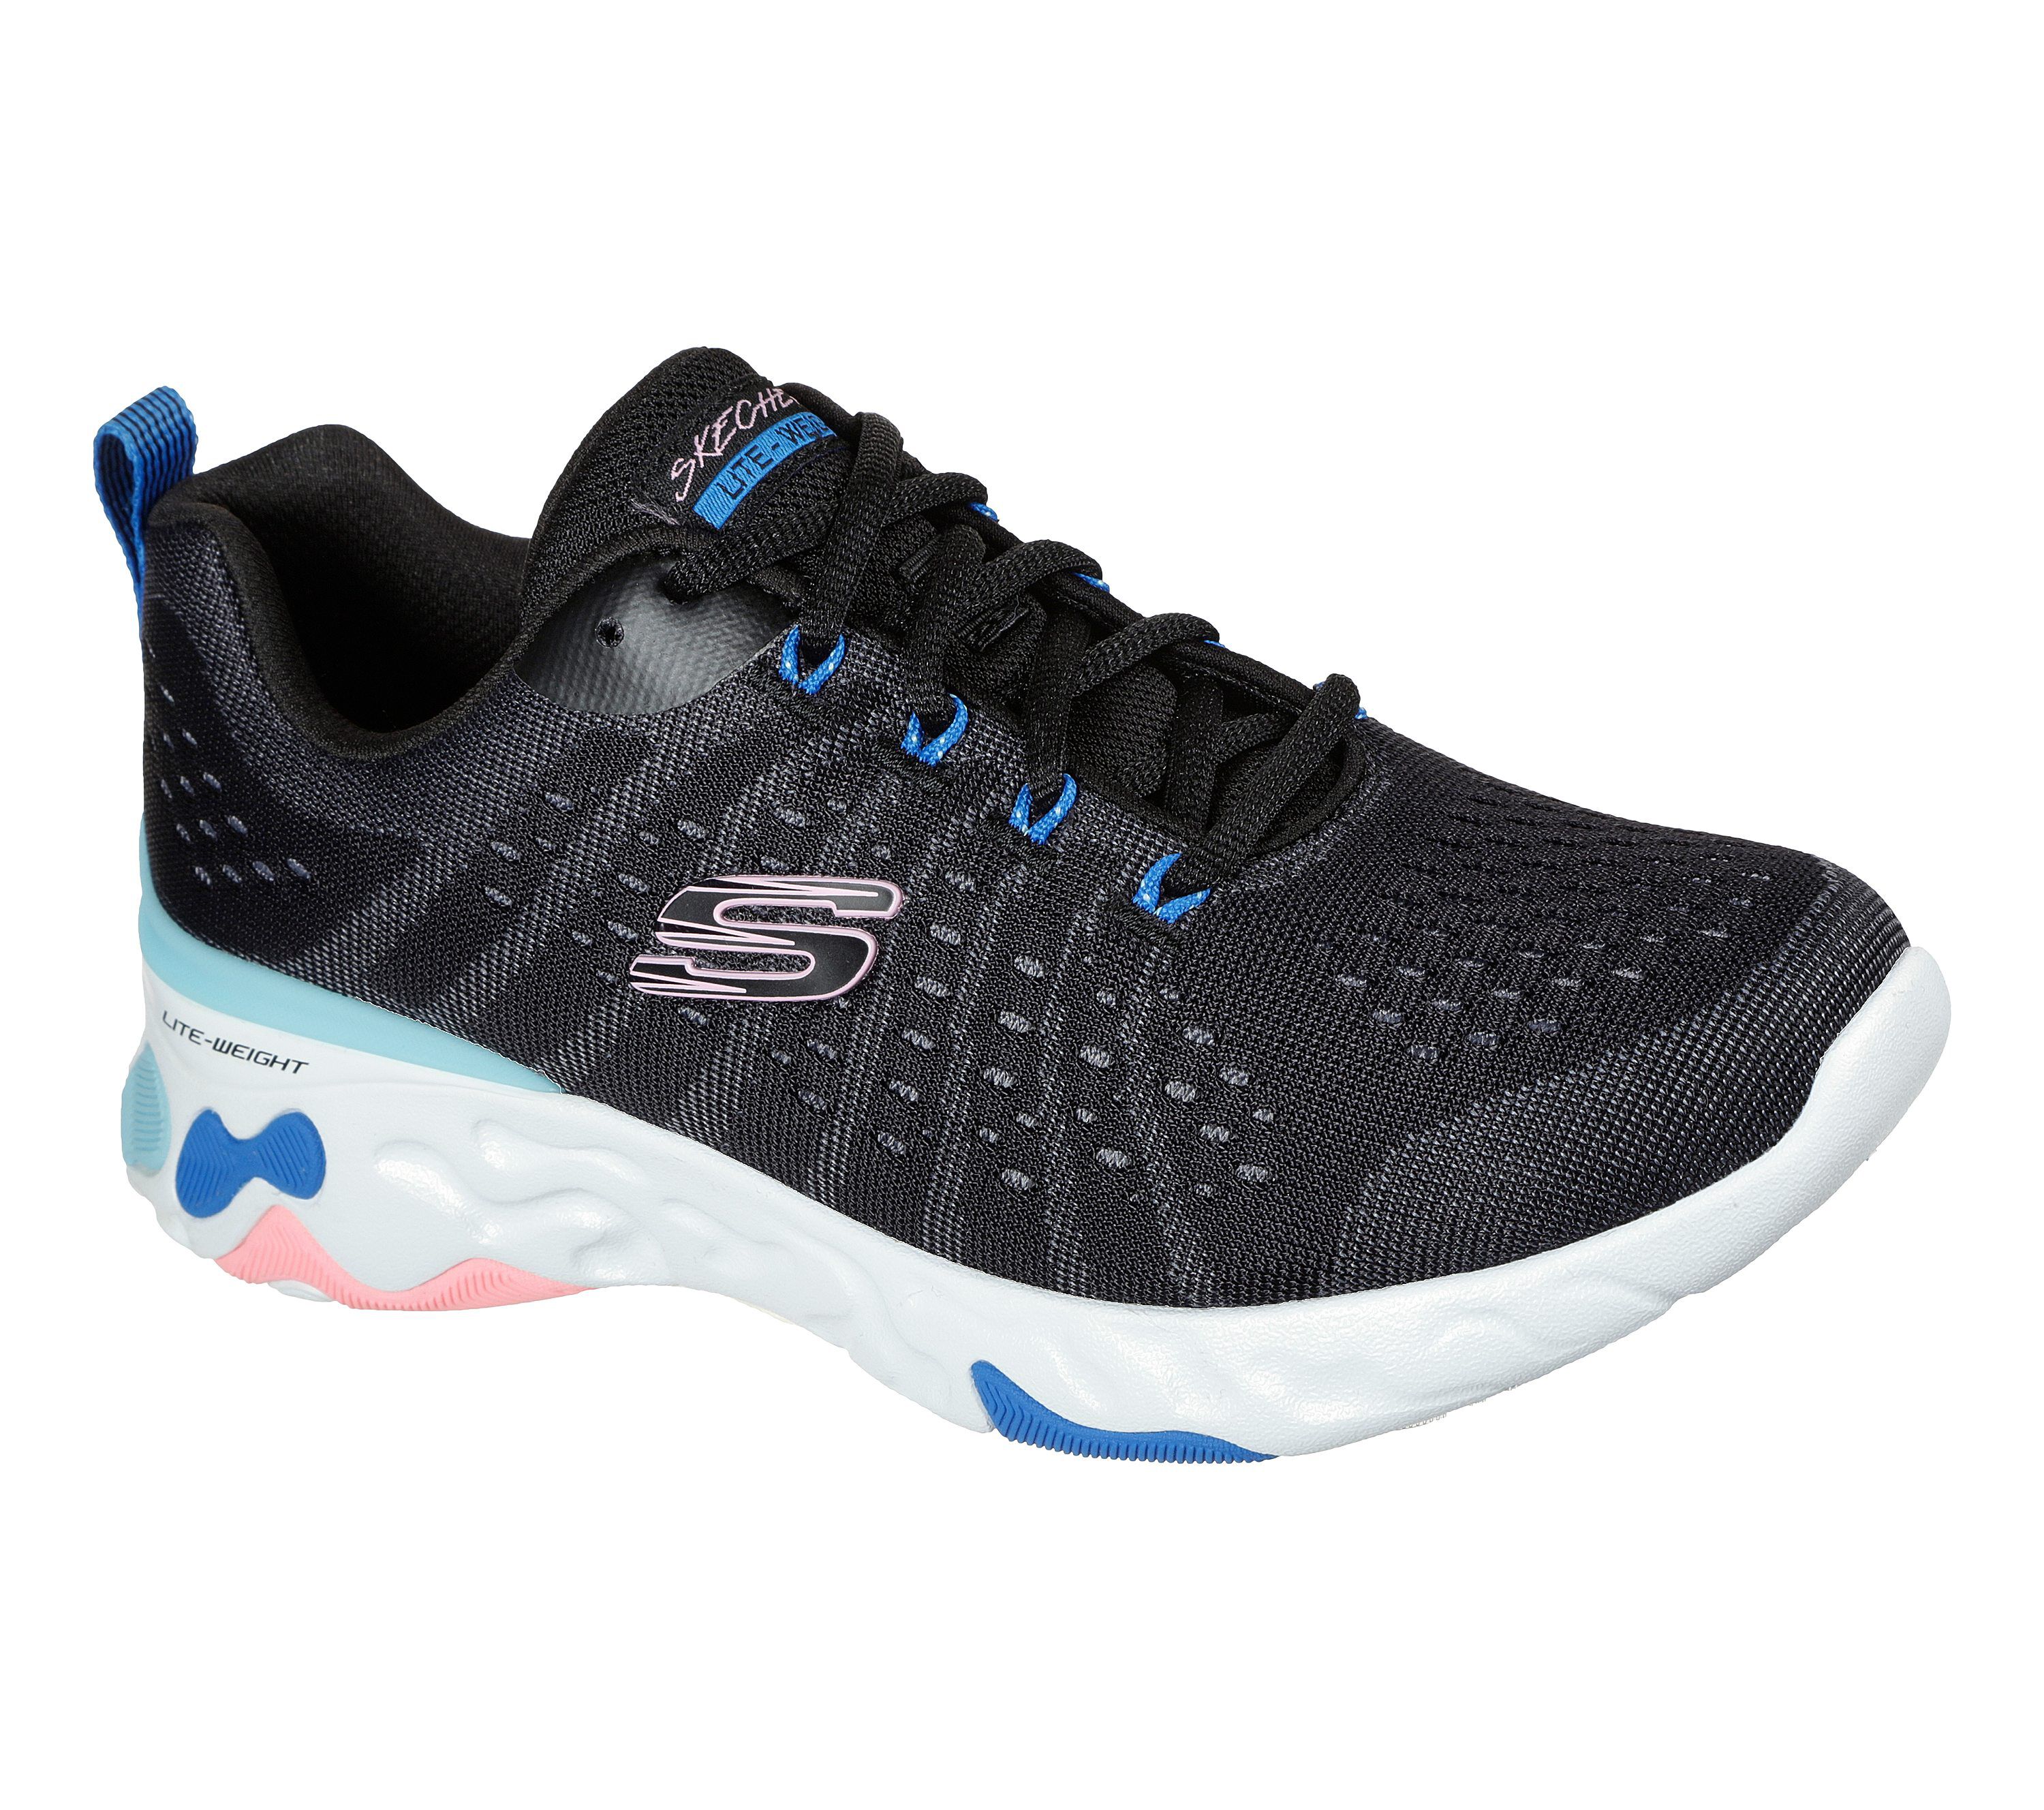 Shop the Skechers Eclipse - She's 